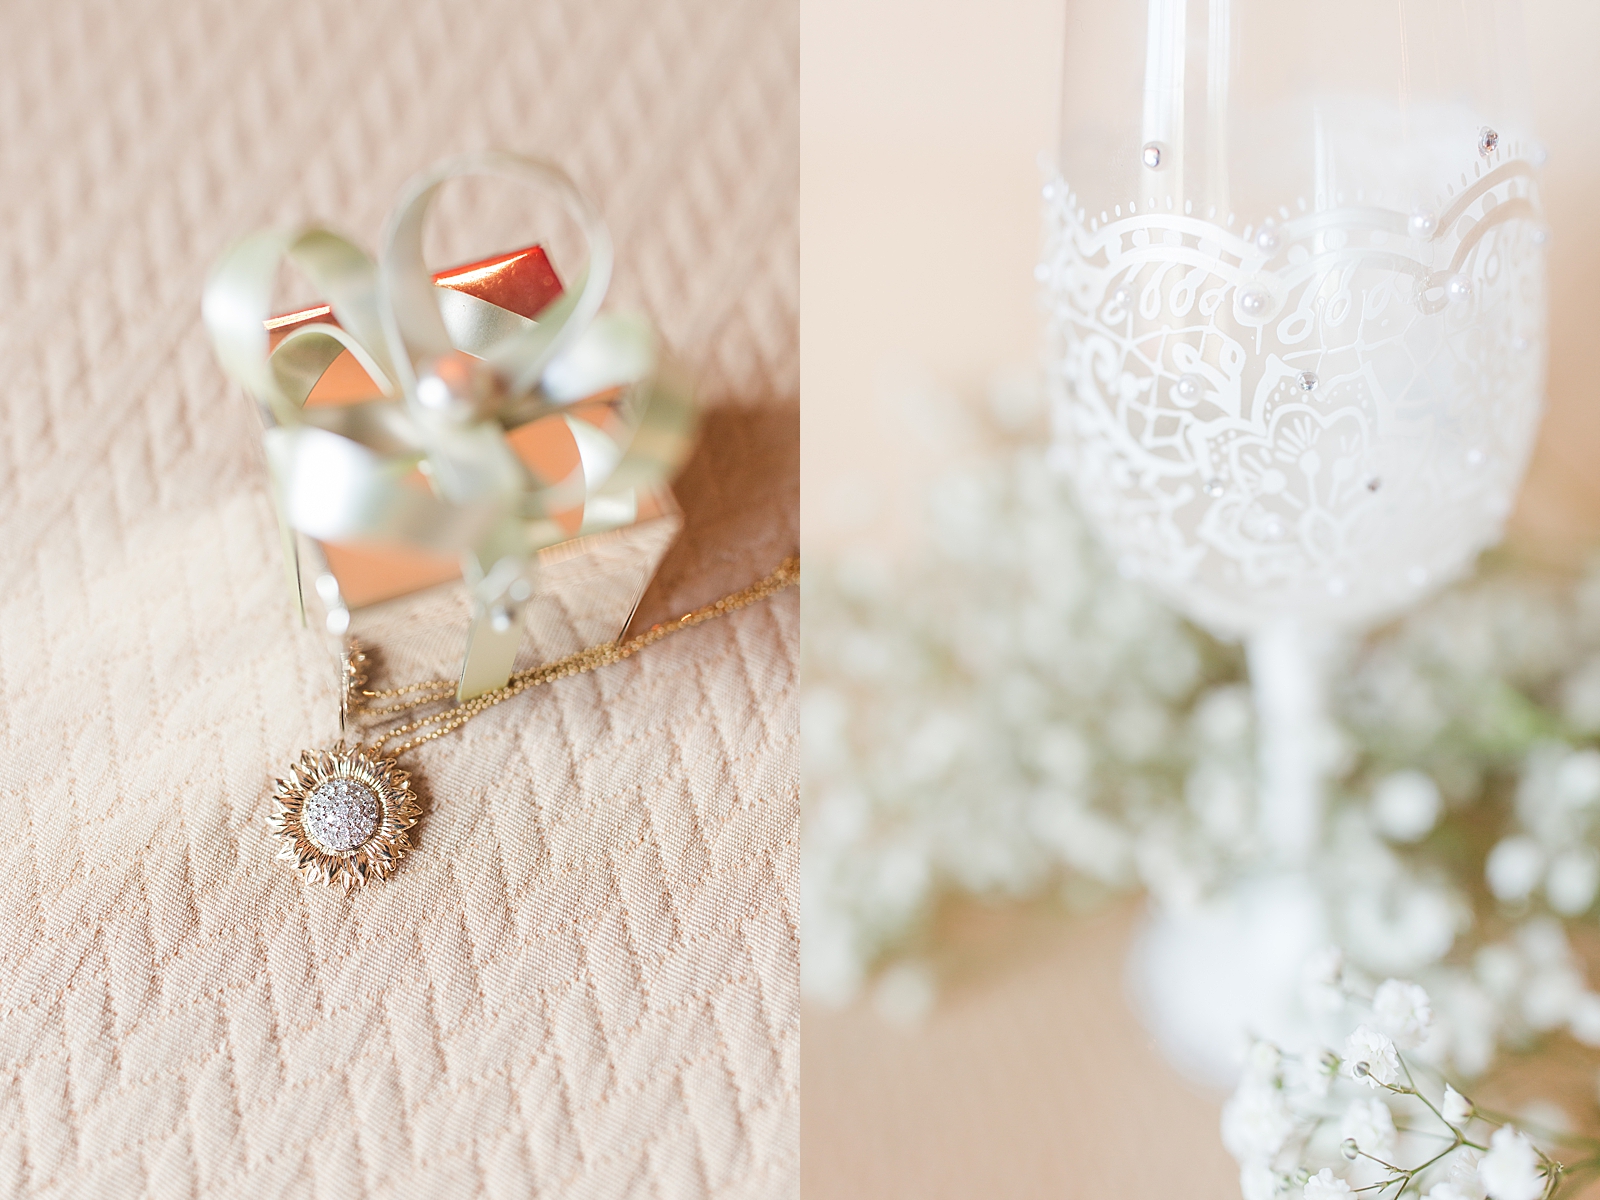 Mooresville Wedding Detail of necklace and detail of wine glass Photos